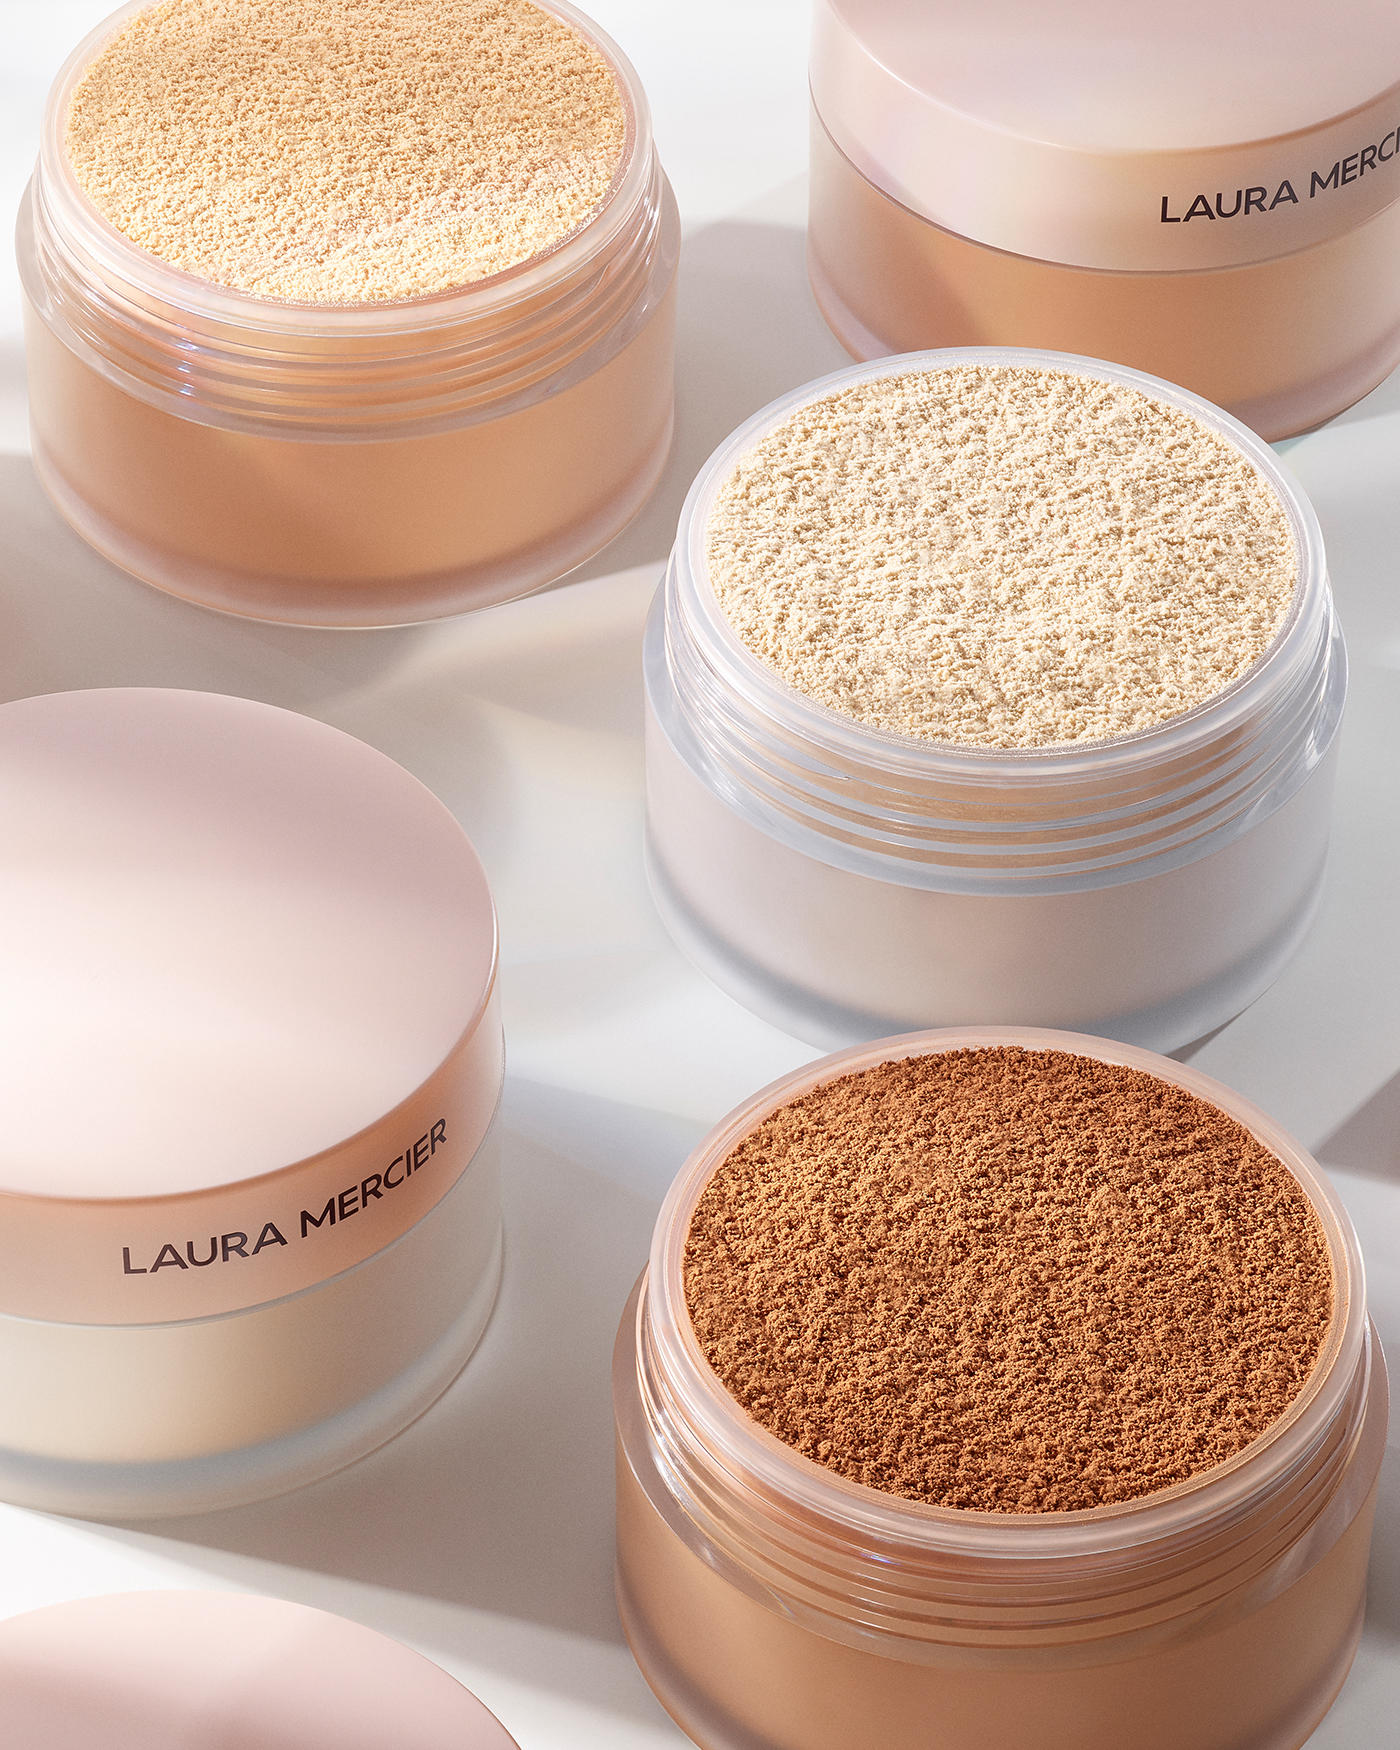 image  1 Laura Mercier - Our newest cult-fave Ultra-Blur Setting Powder is going across the pond